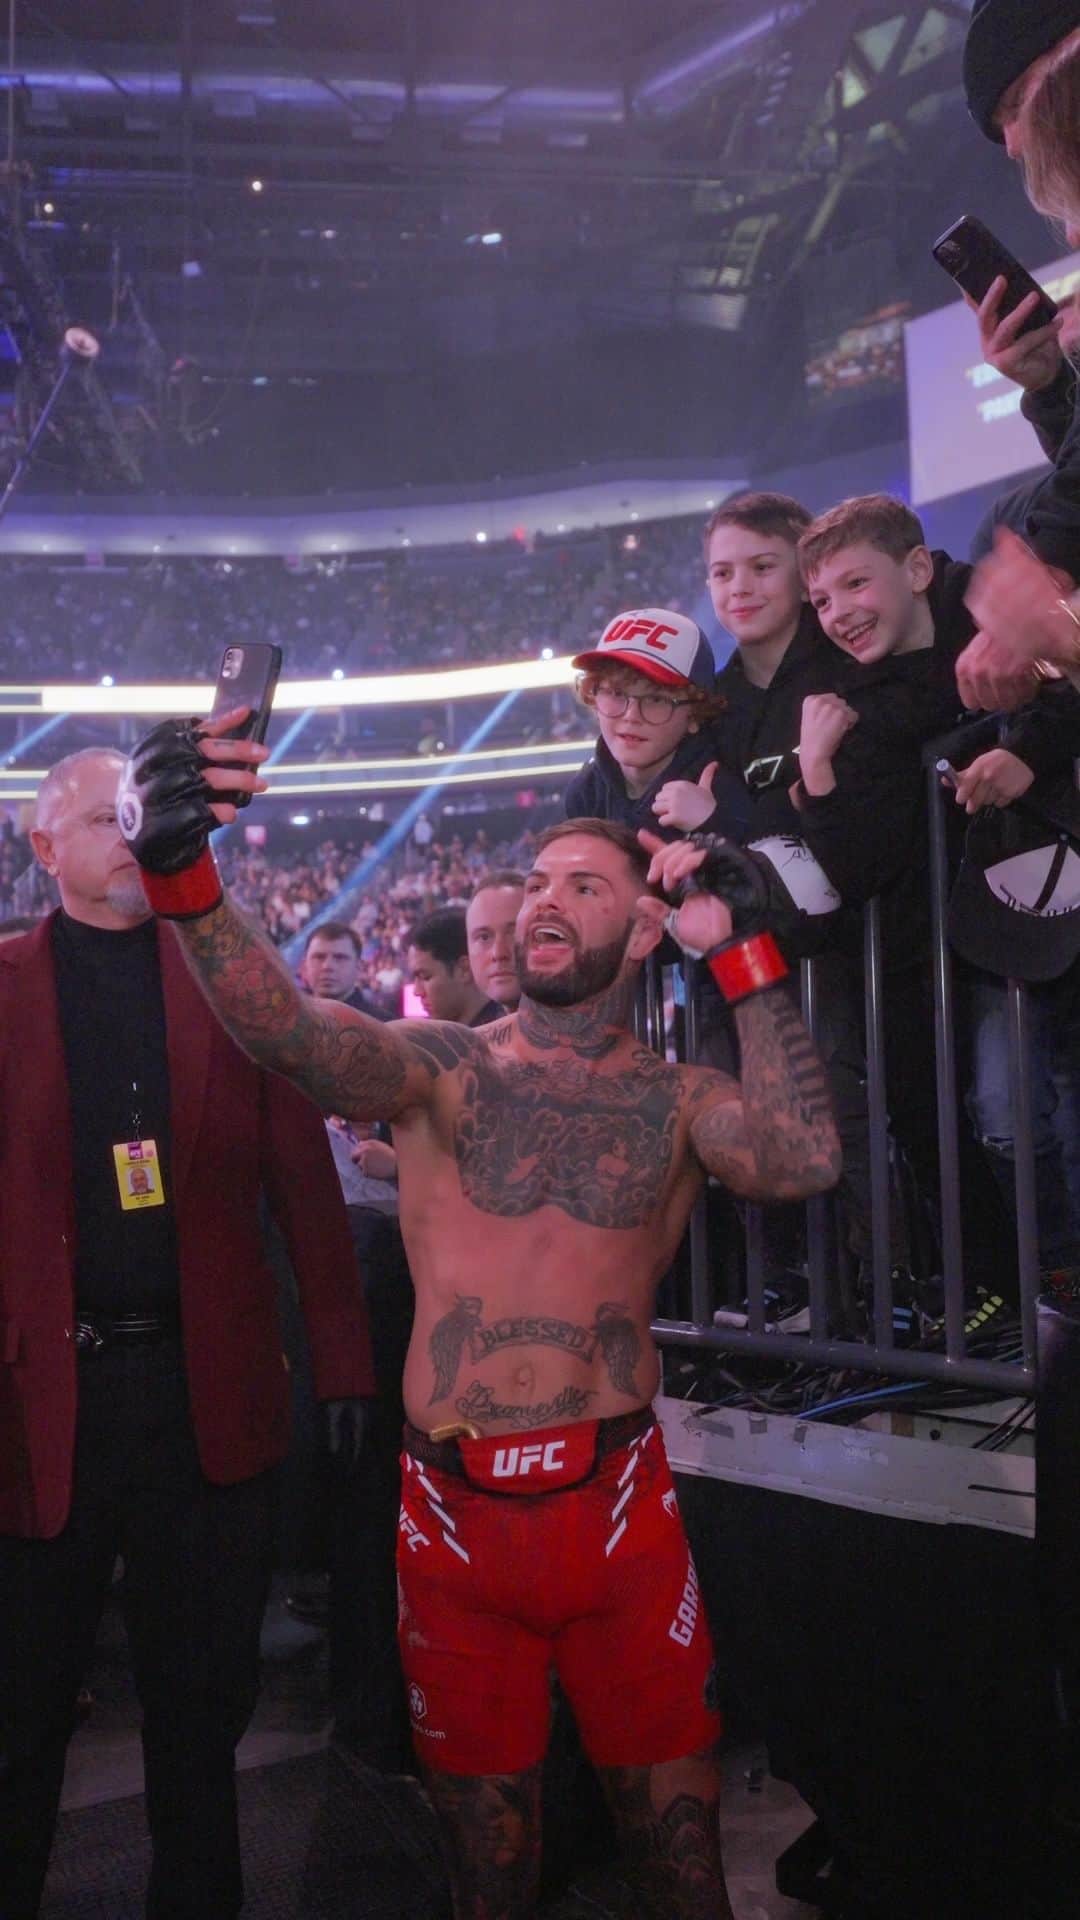 UFCのインスタグラム：「We saw the best version of @Cody_NoLove on Saturday night at #UFC296  For the first time his son was in attendance and got to see his dad take home the win! 🥹」